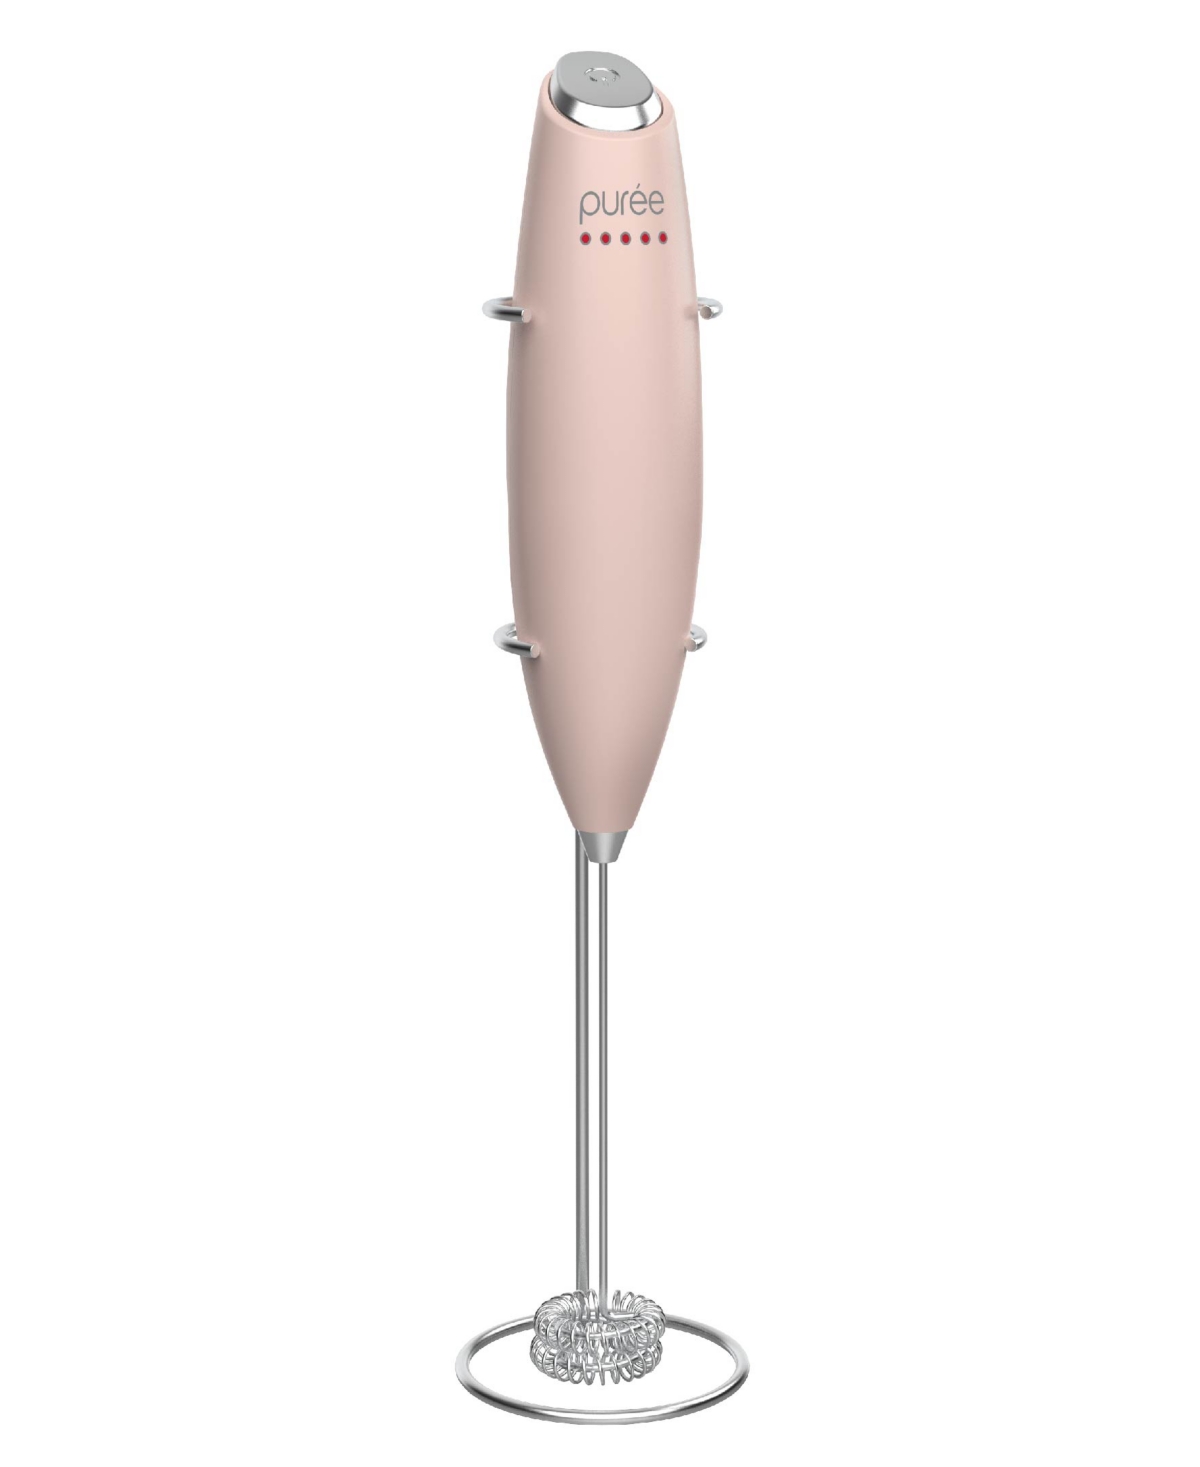 Tzumi Puree Milk Frother, Battery-powered Handheld Milk Frother Wand In Pink